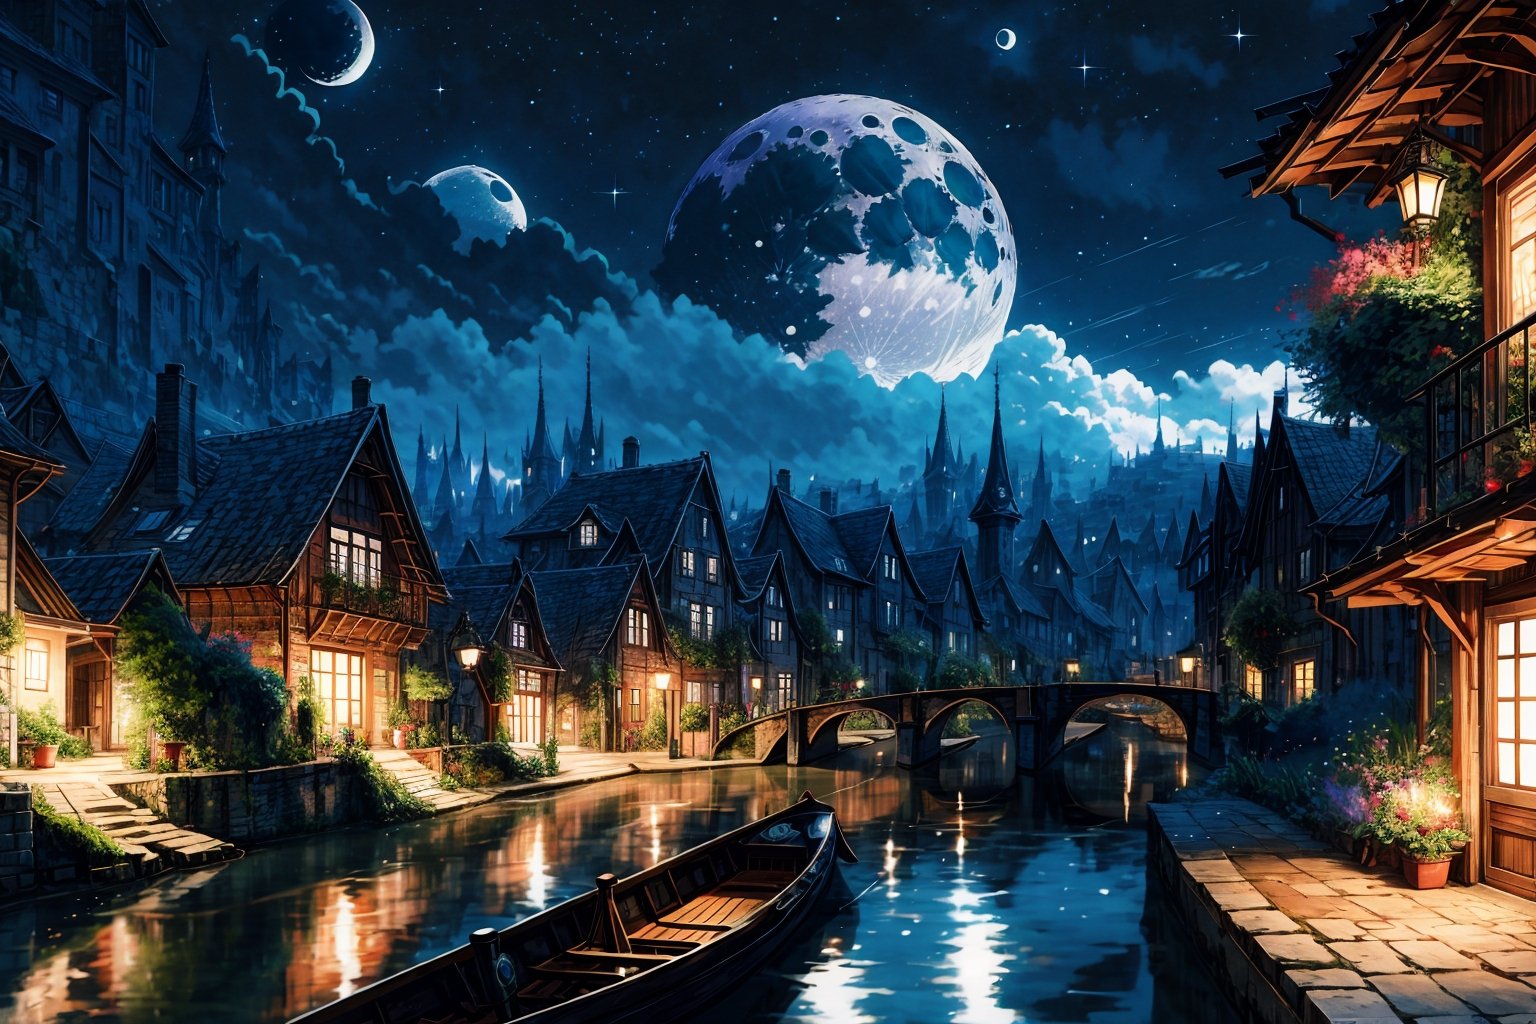 High quality, masterpiece, ,rayearth, a wooden boat traveling along a canal that passes through an ancient fantasy city, at night with the moon shining, aerial view